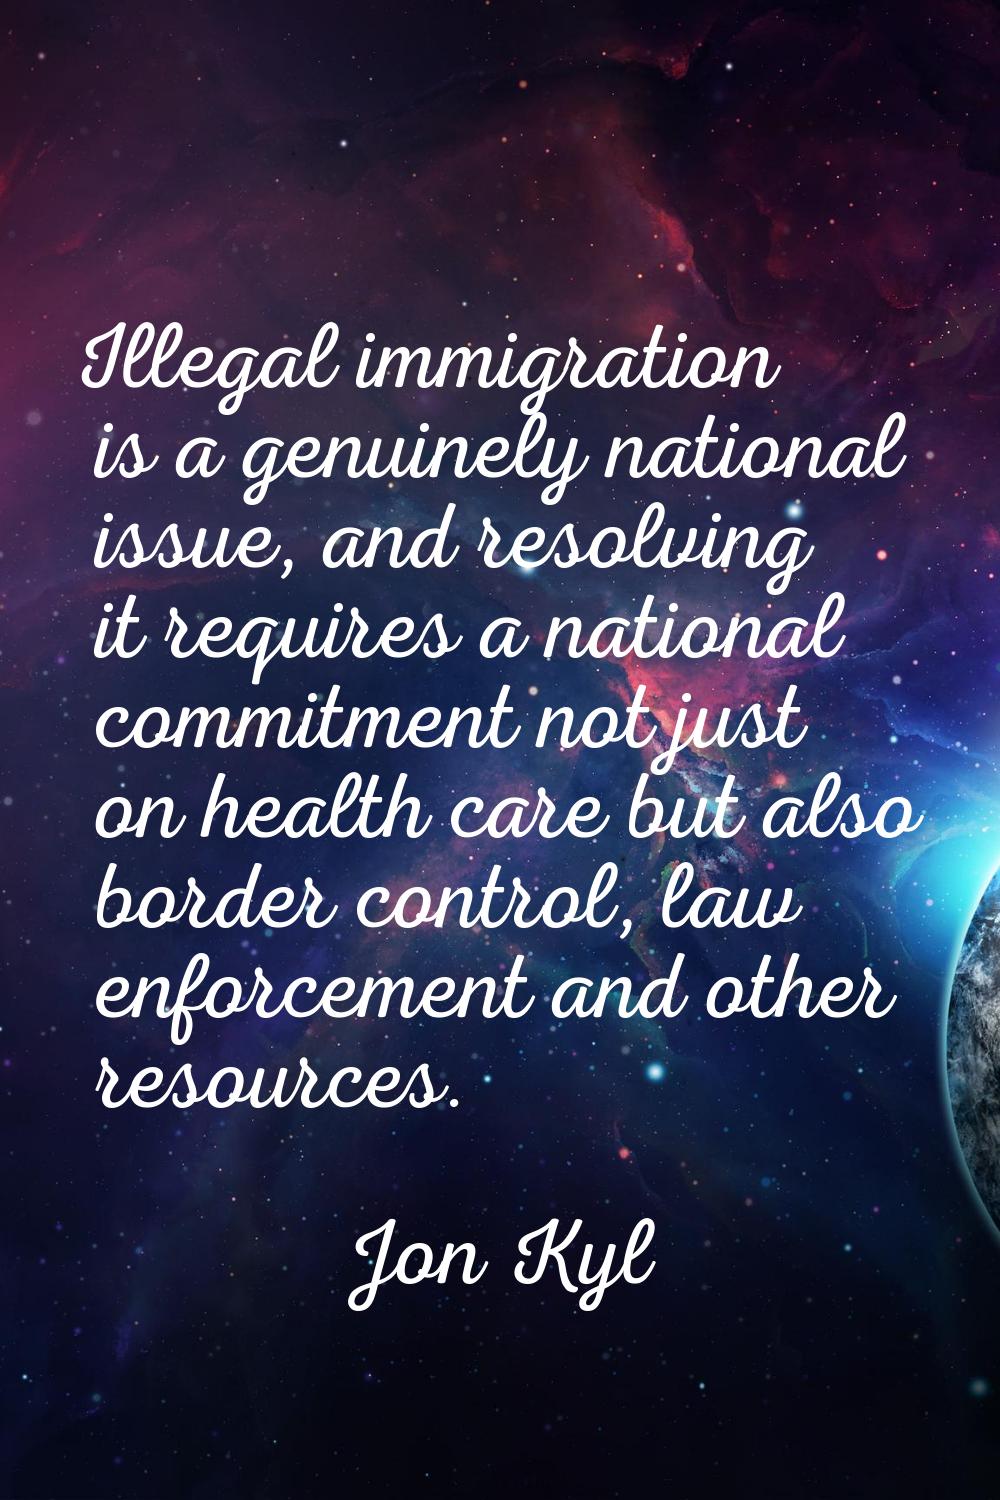 Illegal immigration is a genuinely national issue, and resolving it requires a national commitment 